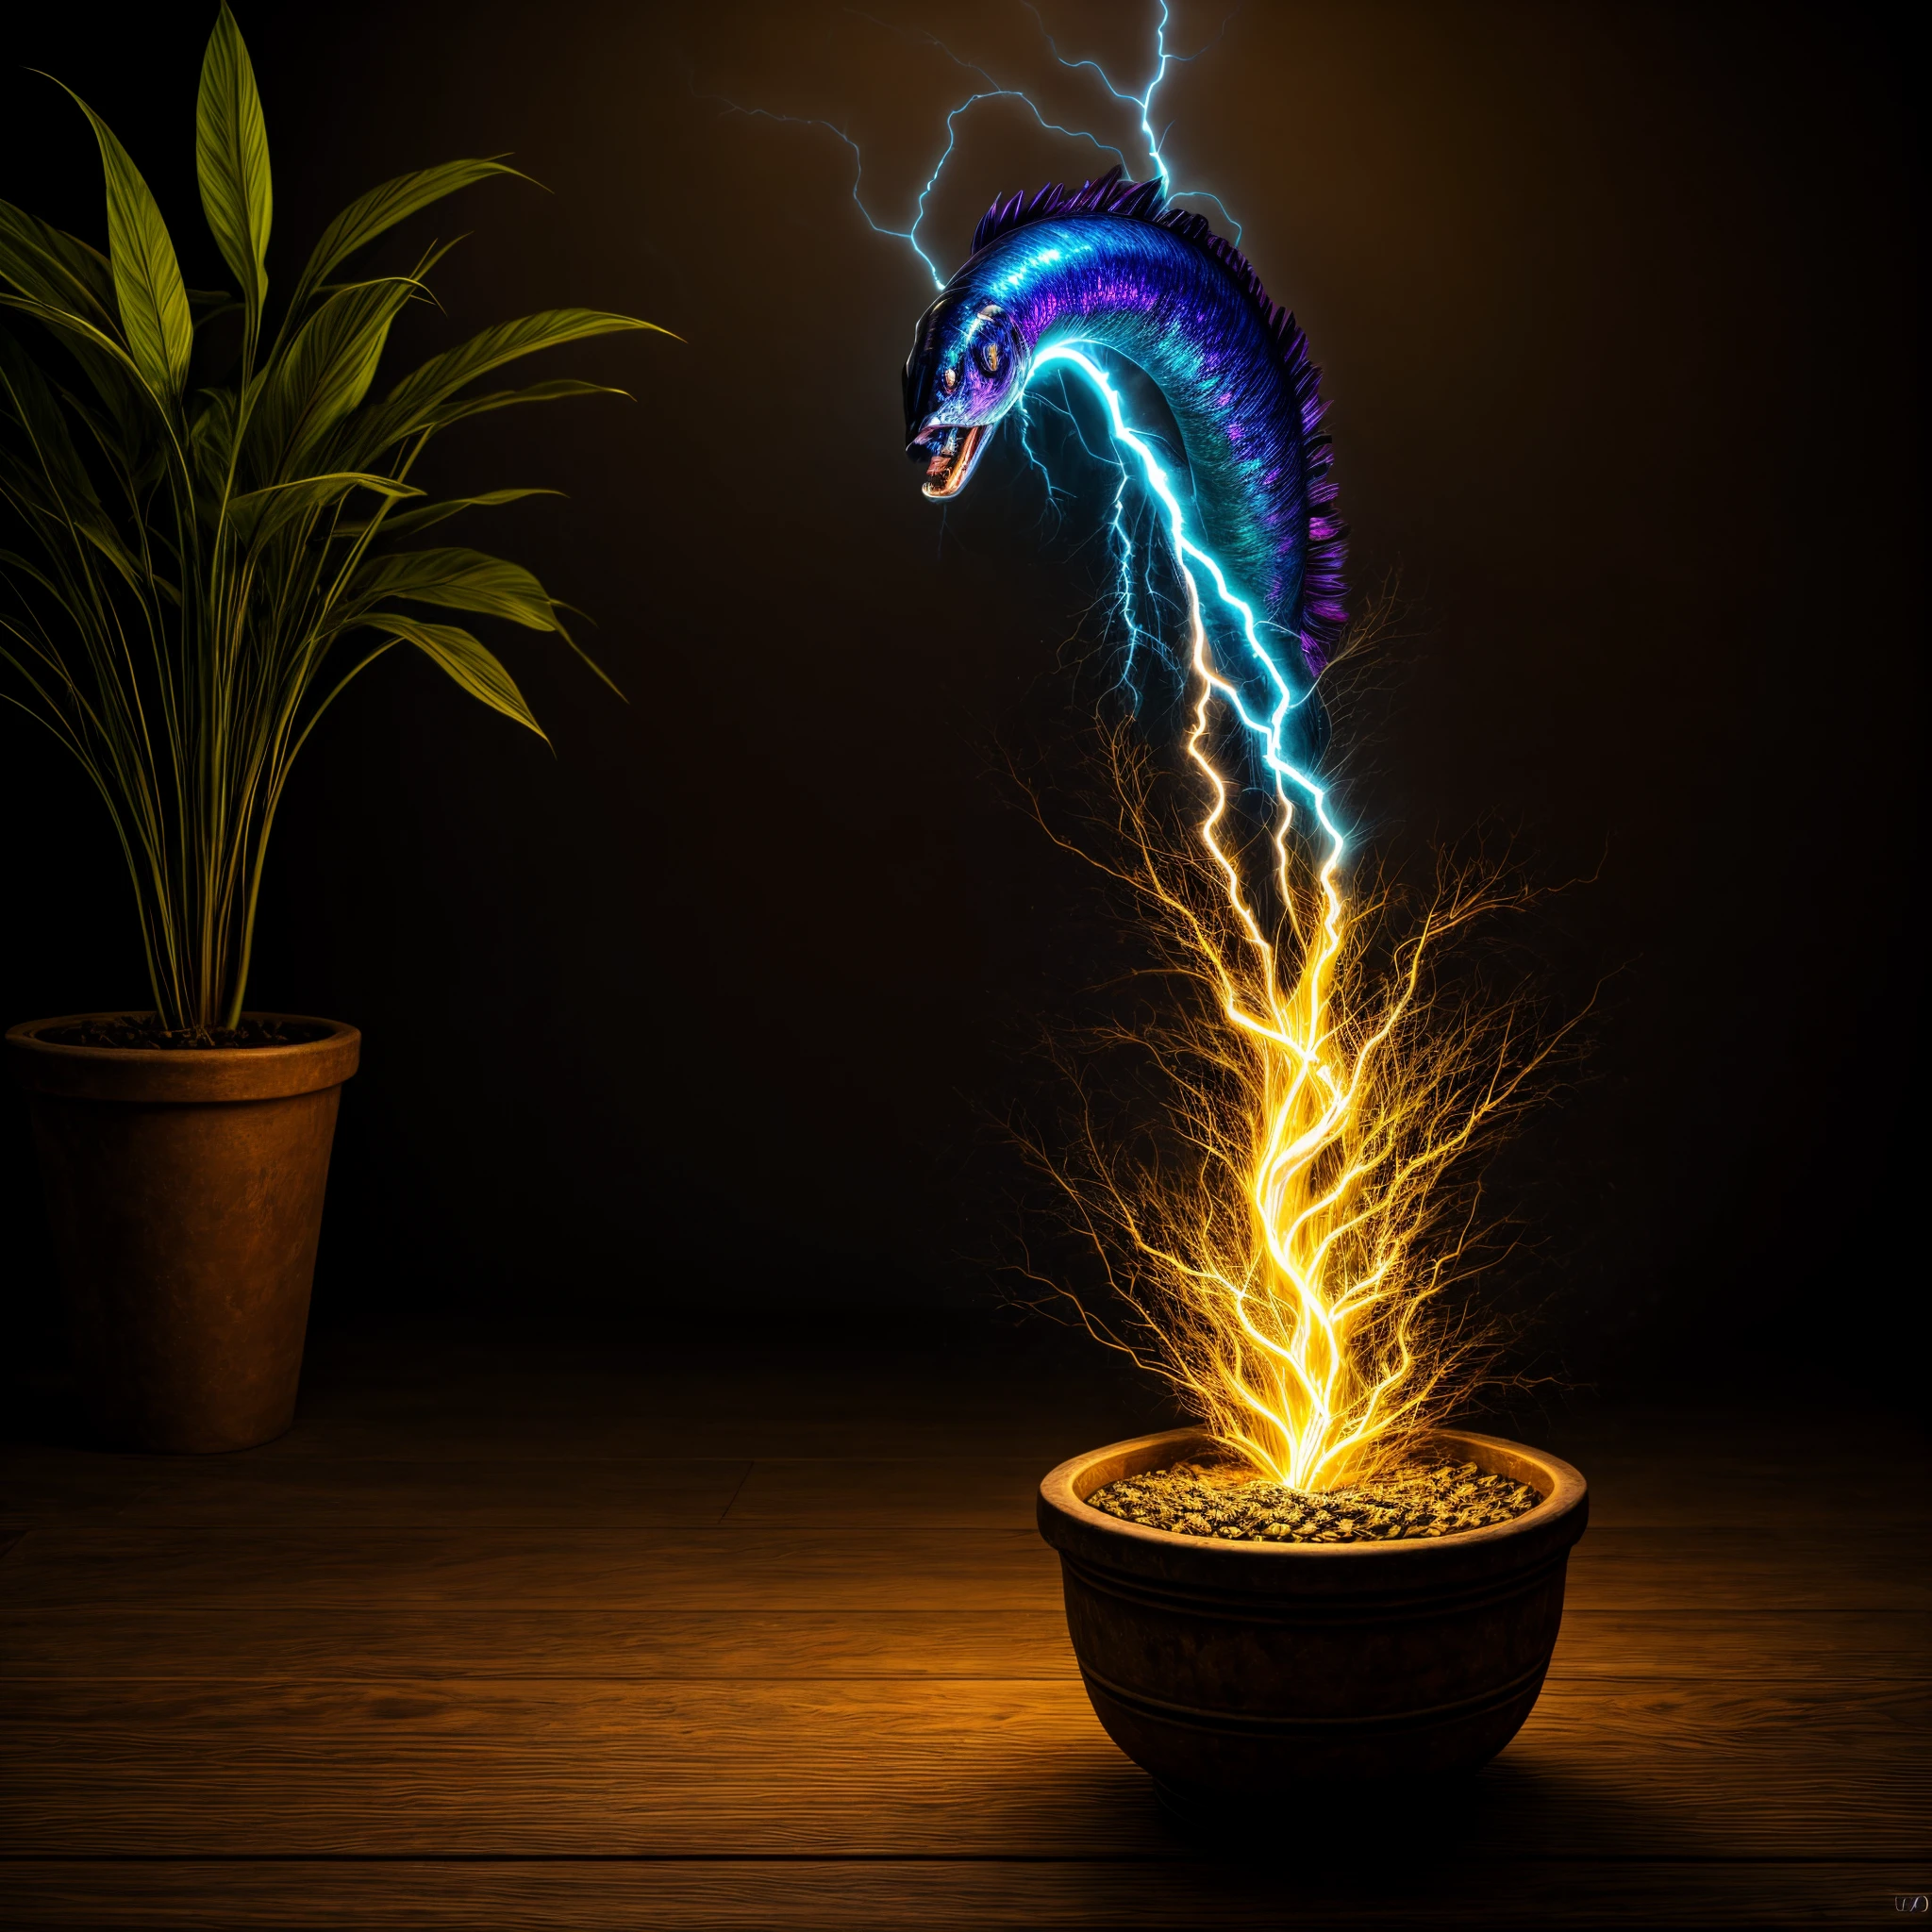 (best quality,4k,8k,highres,masterpiece:1.2),ultra-detailed,(realistic,photorealistic,photo-realistic:1.37),fantastical, vibrant colors,dynamic lighting,electrifying atmosphere,blue eel-headed flower,plant in pot,bolts of lightning,illumination,table setting,energetic display